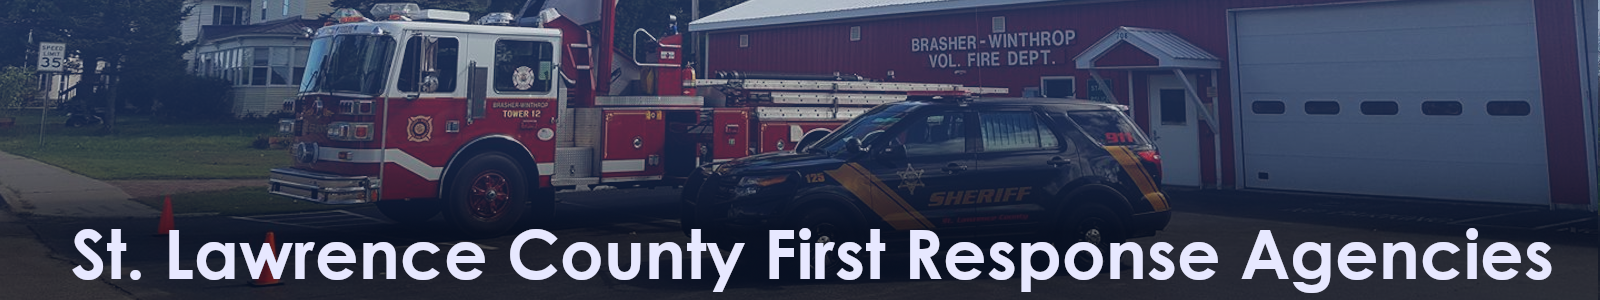 St. Lawrence County First Response Agencies